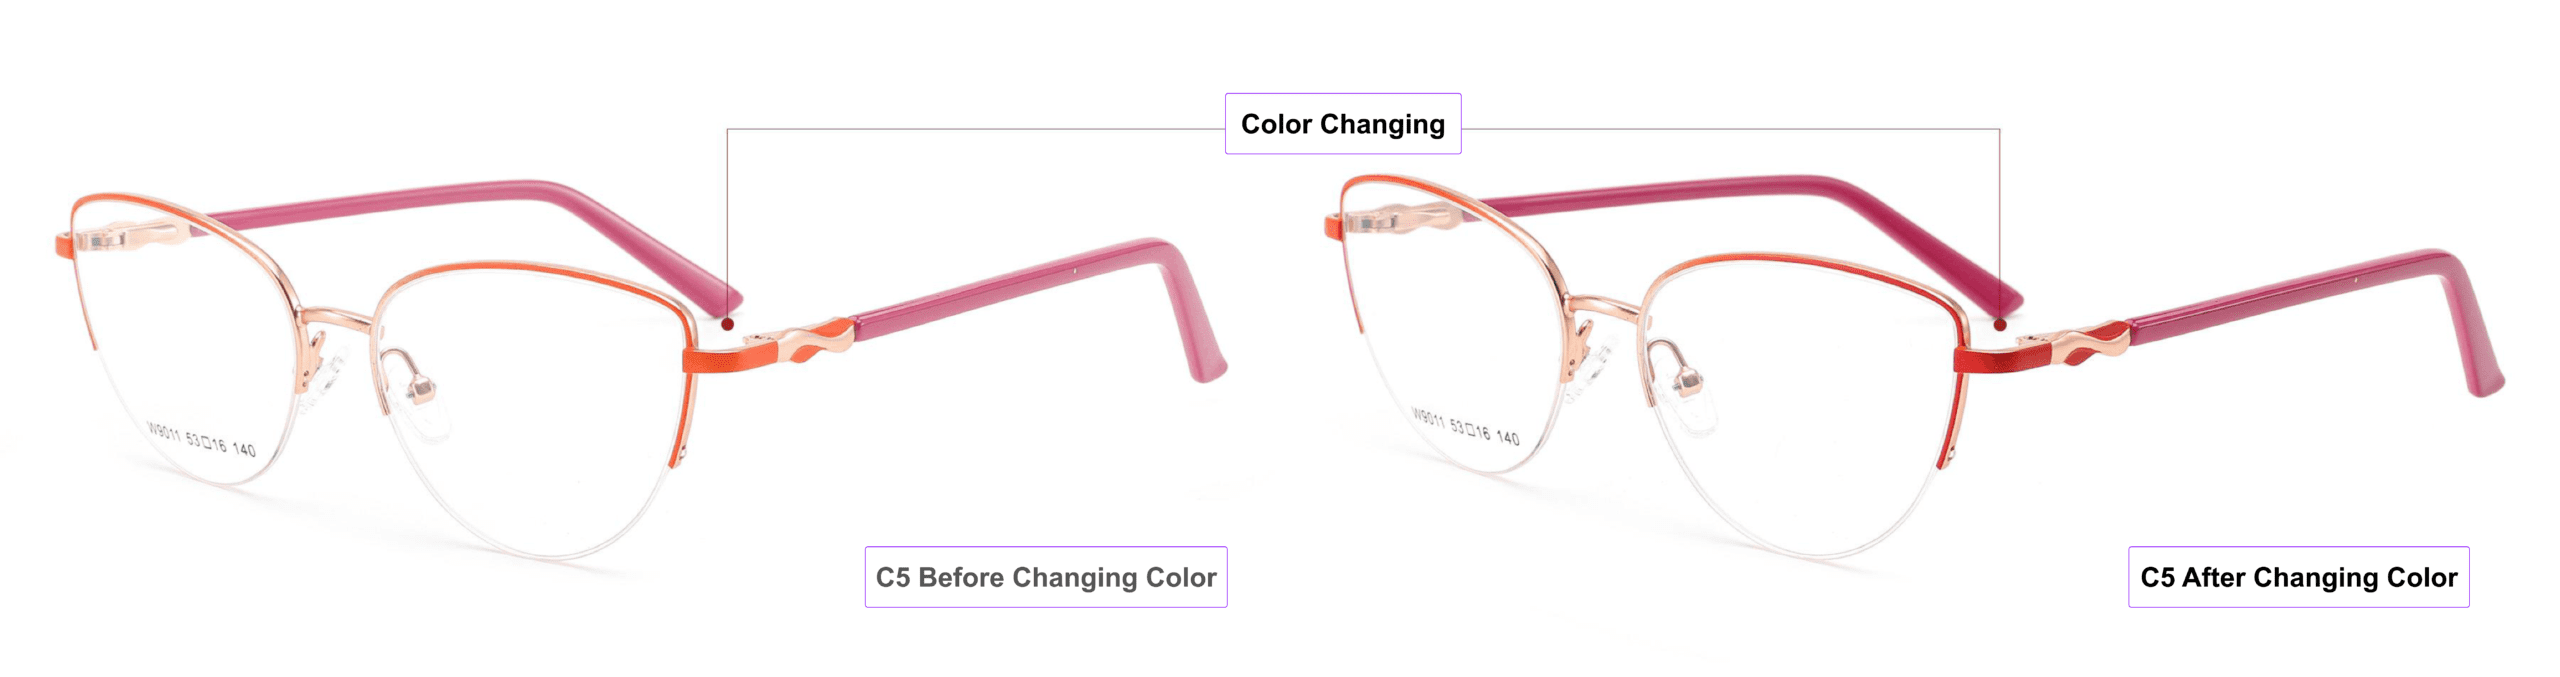 color changing glasses frames, orange, pink gold, bright red, burgundy, process of changing color, China glasses supplier, eyeglass accessories